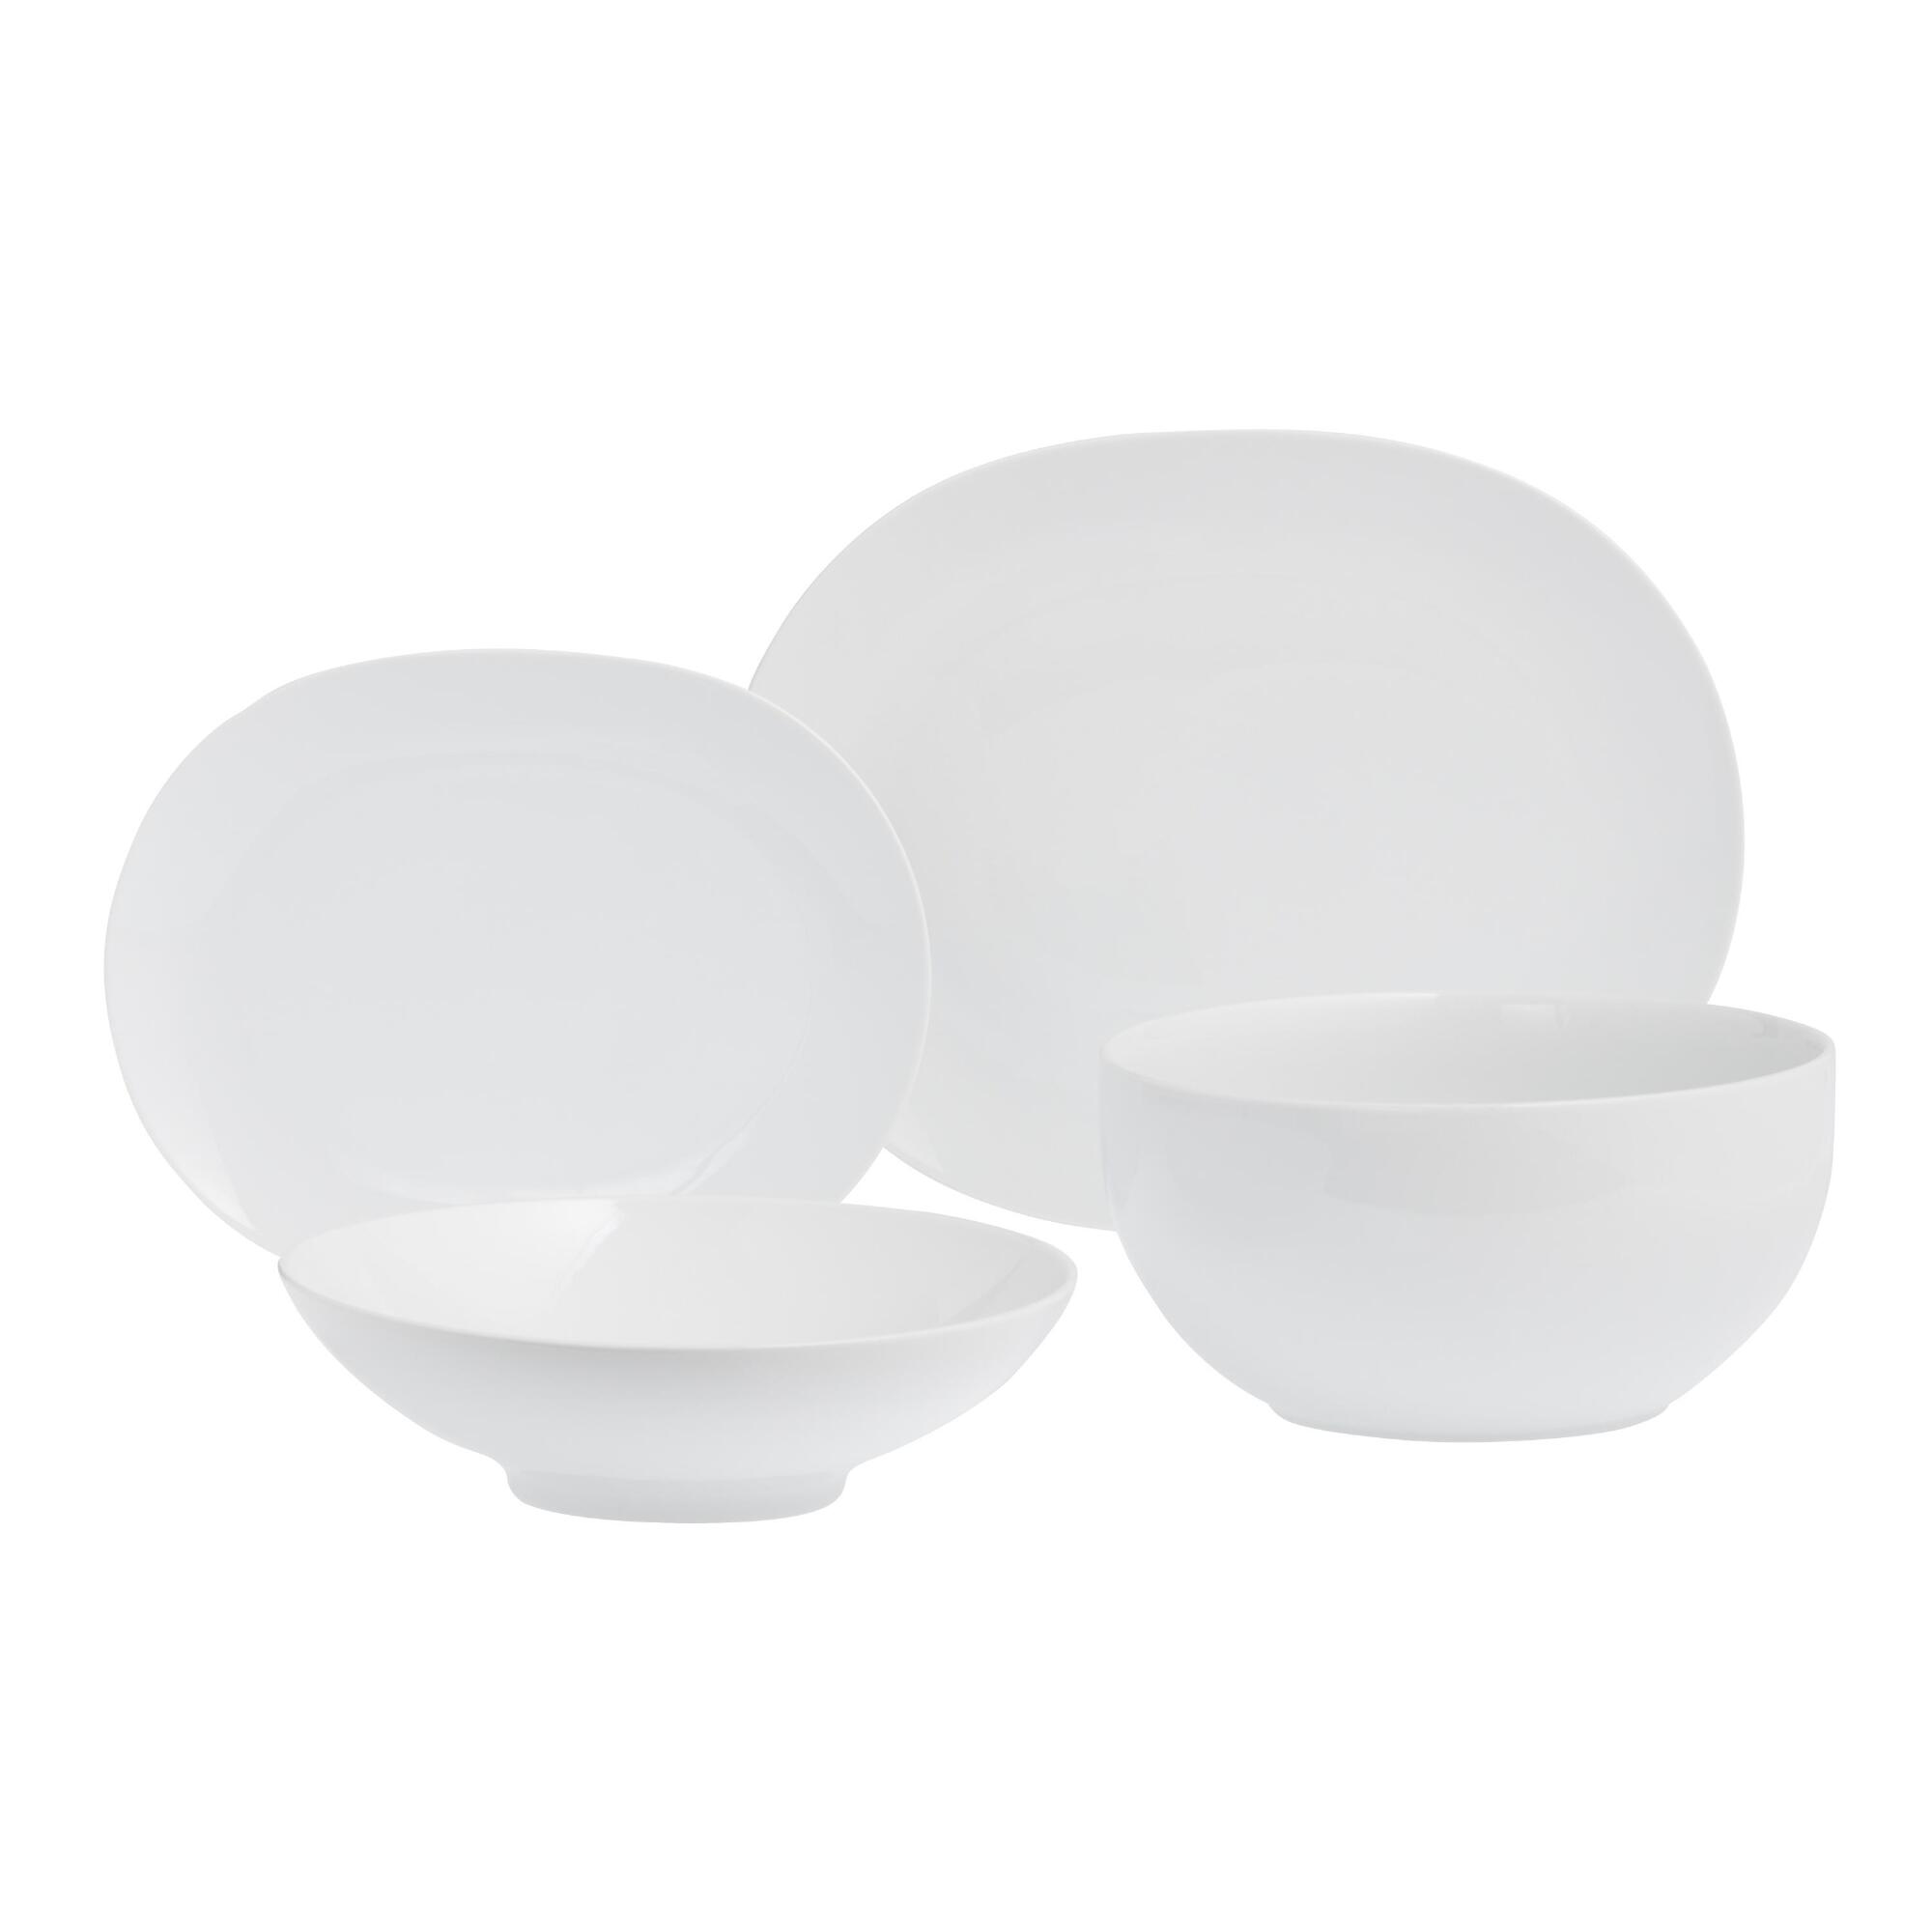 White Coupe Serveware Collection by World Market